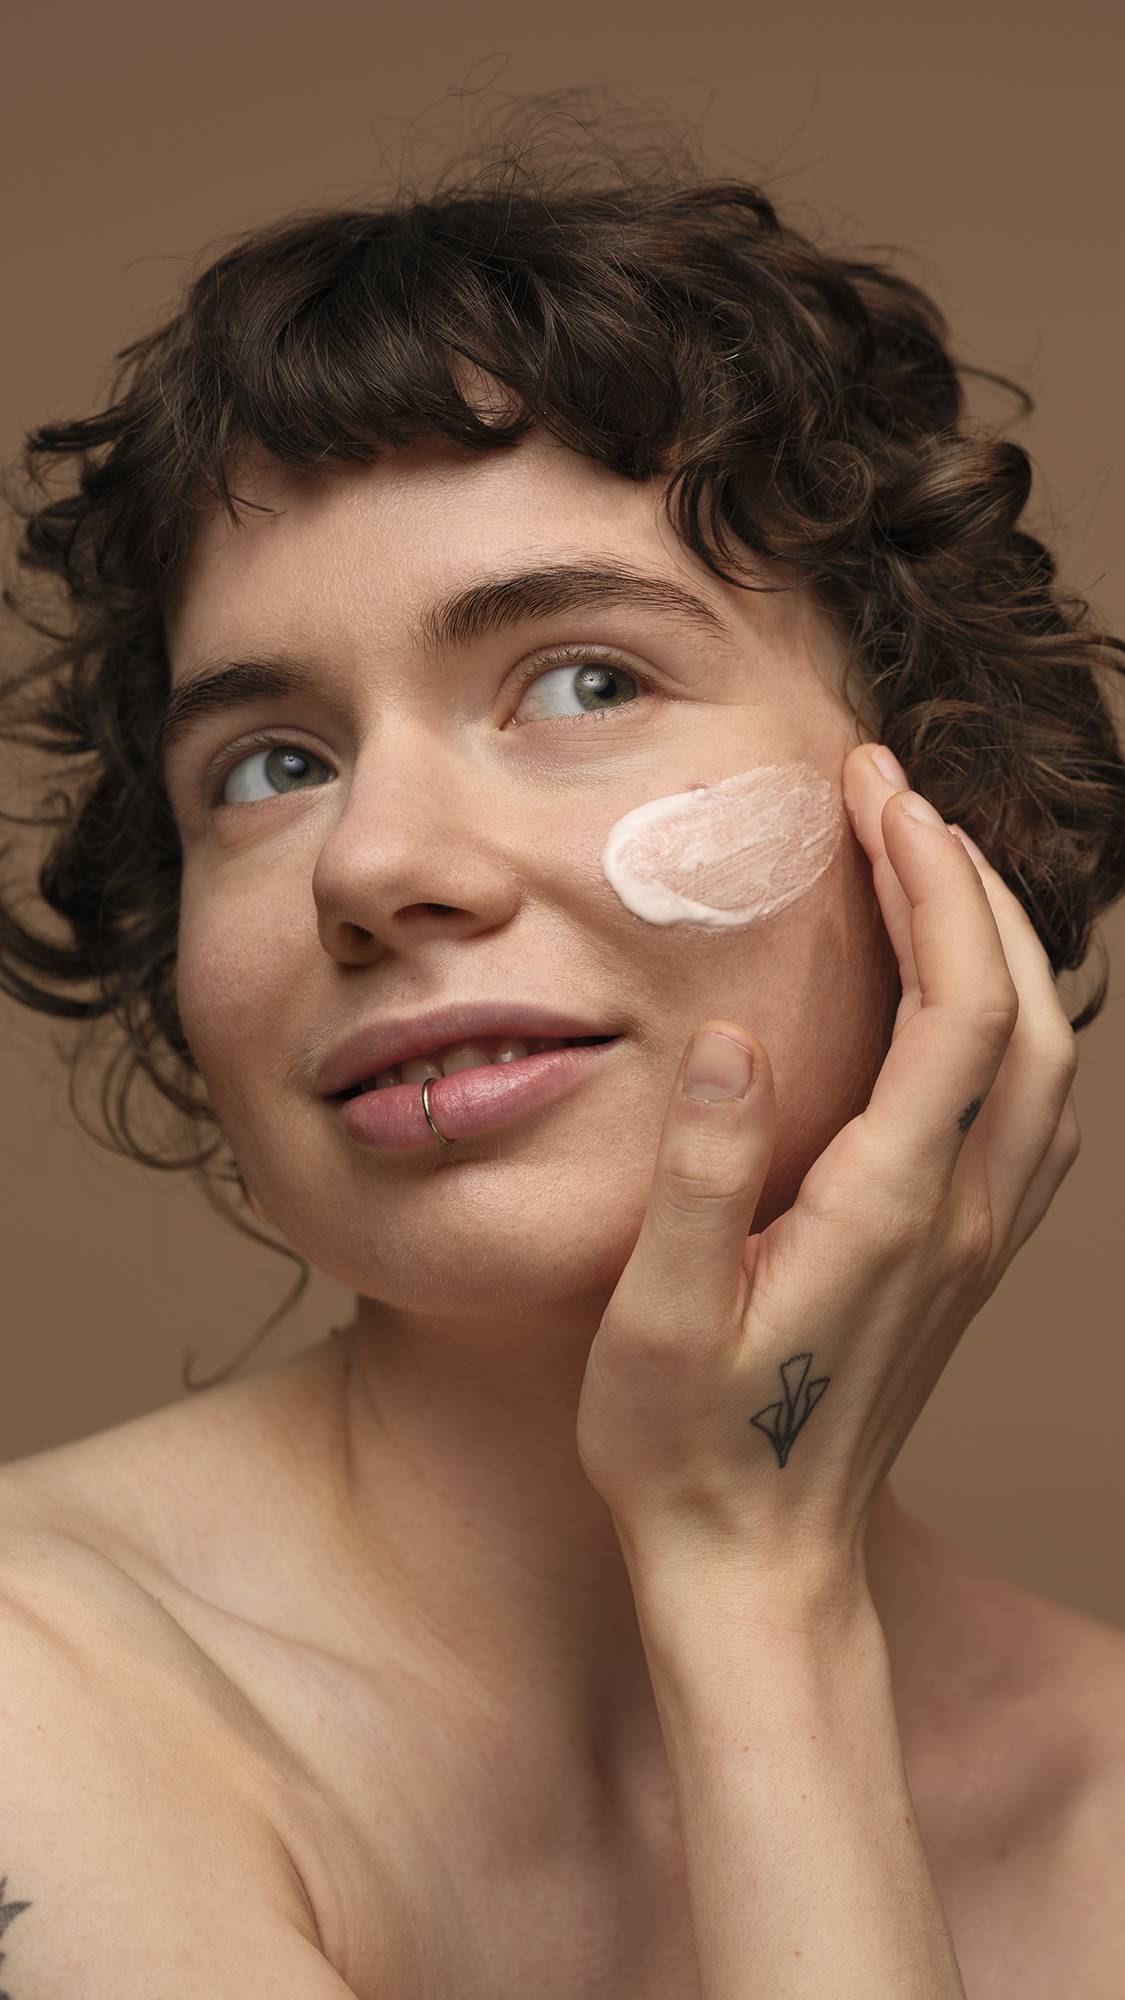 The image shows the model with curly brown hair on a warm, earth-toned background as they gently smooth the Vanishing Cream self-preserving moisturiser over their cheek. 